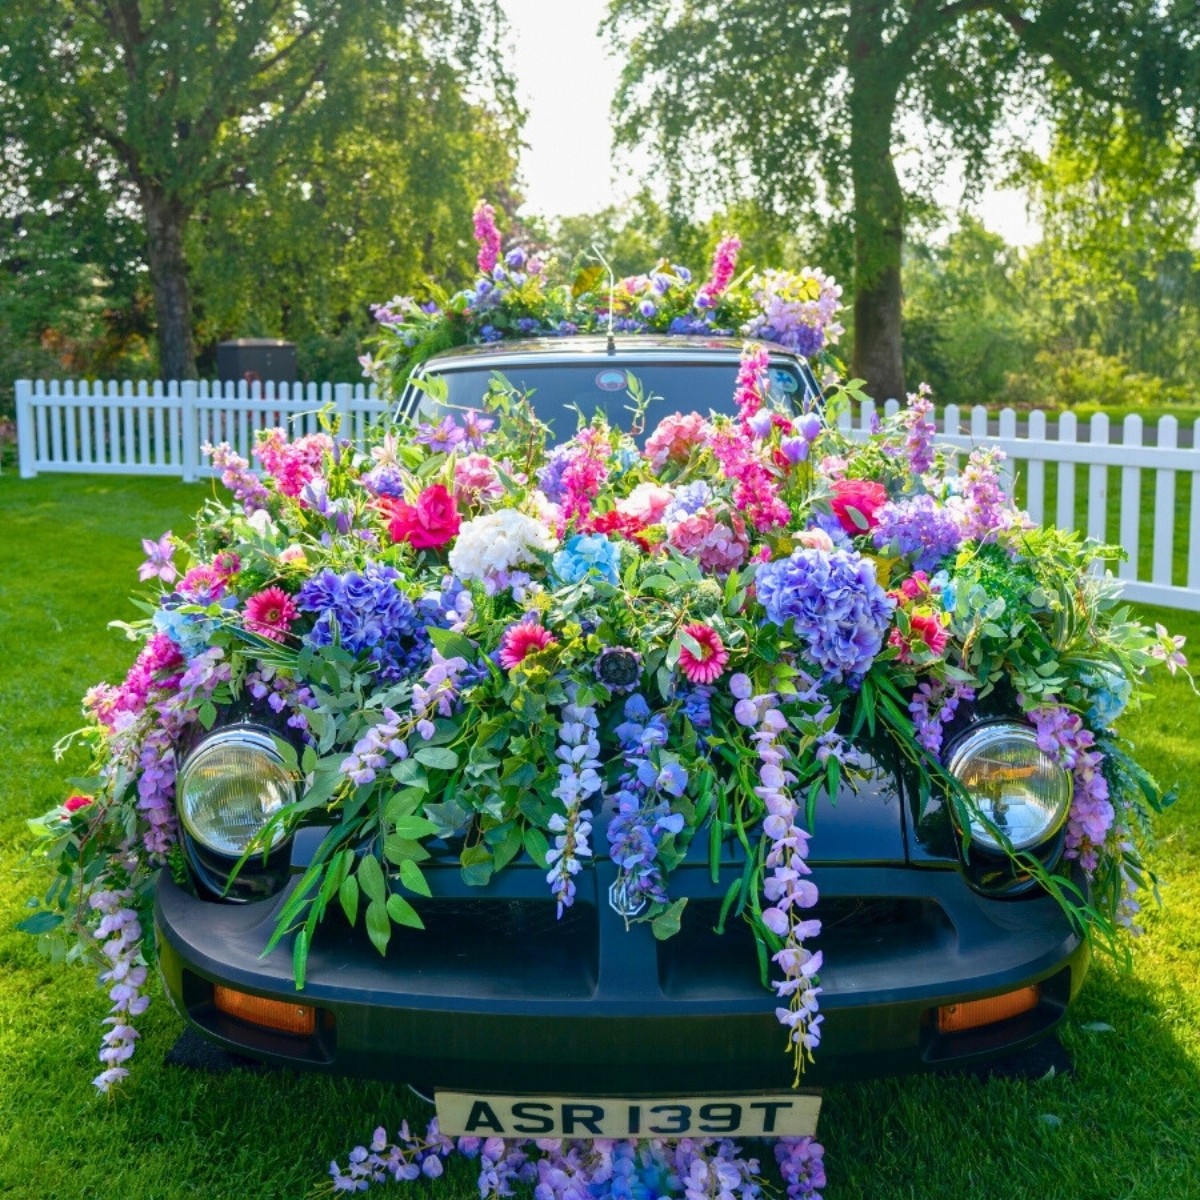 Classic MG car with florals by Penelope Fleurs